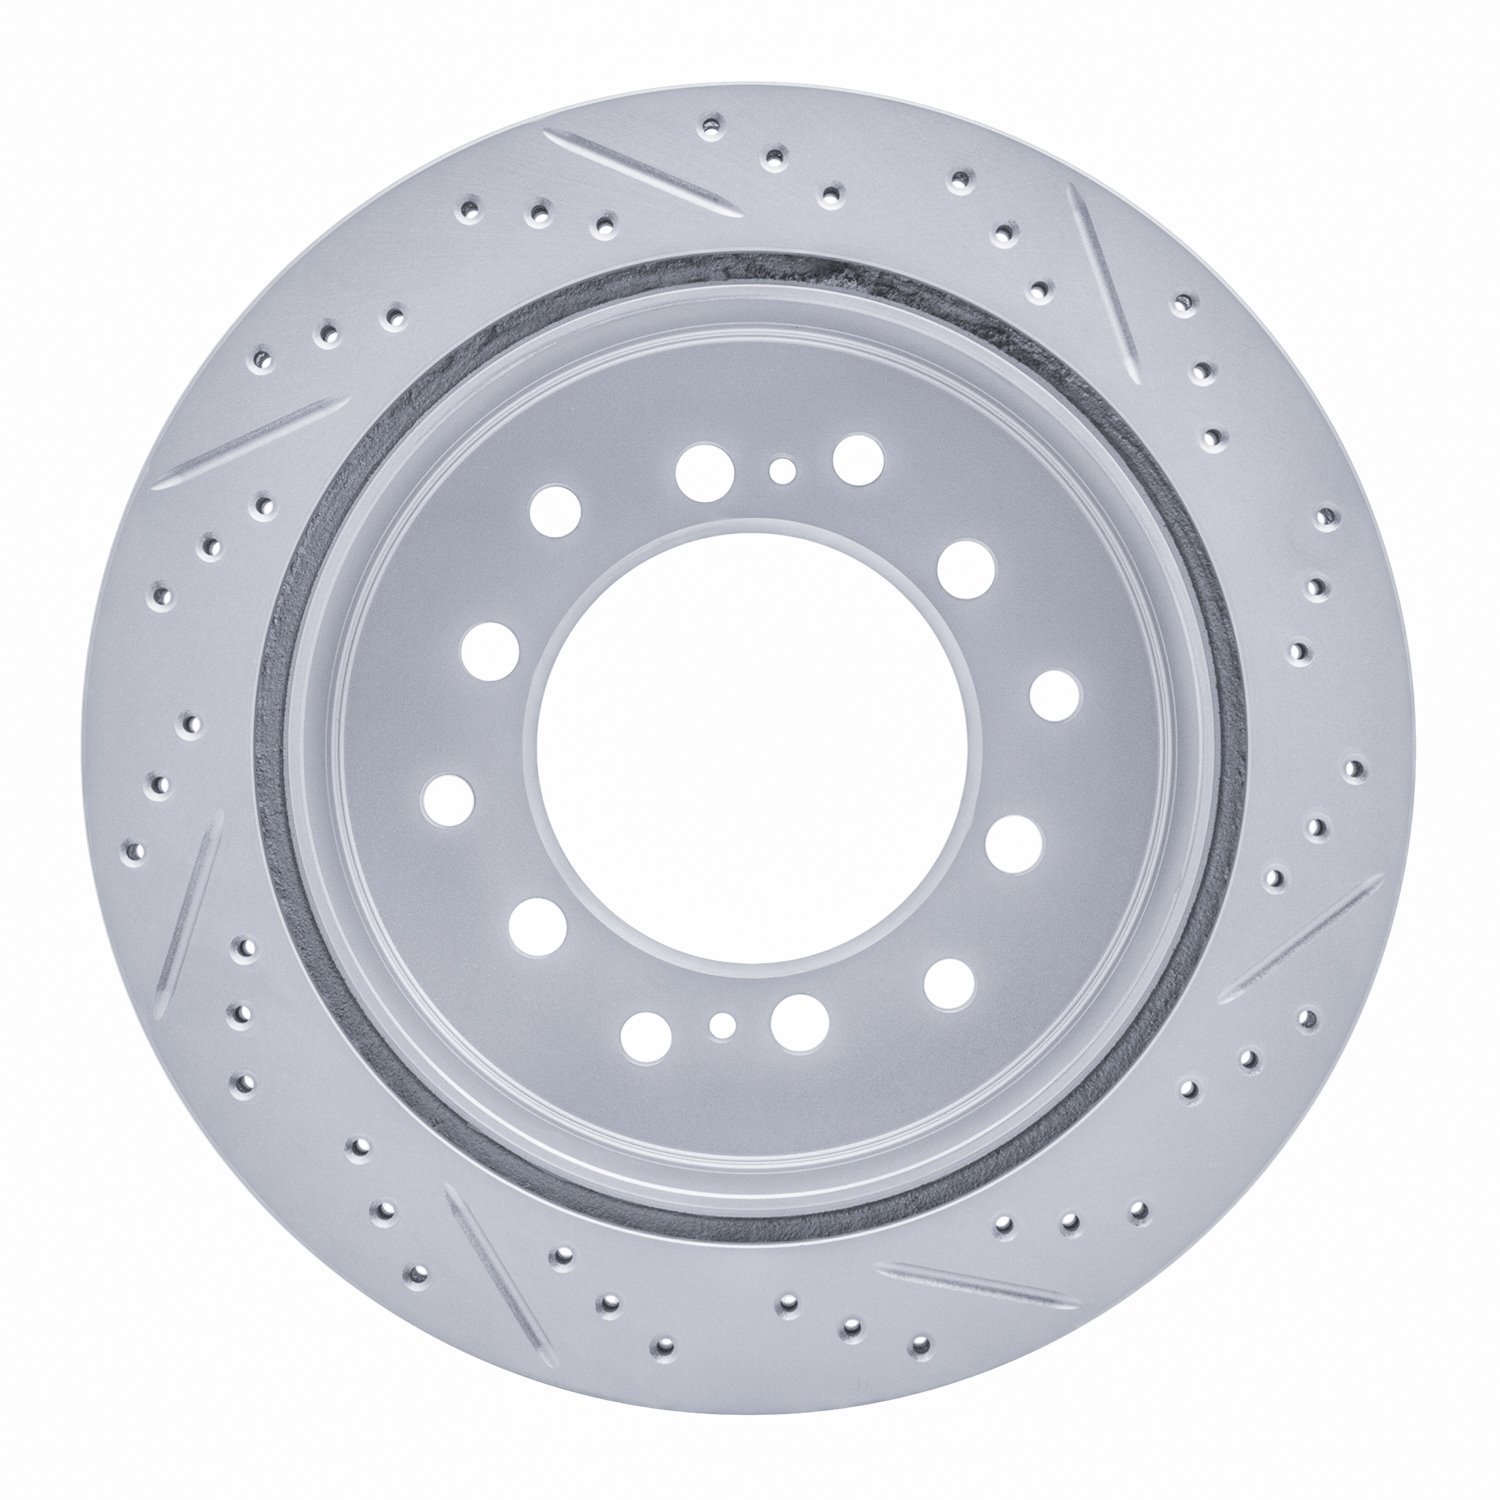 830-76143L Geoperformance Drilled/Slotted Brake Rotor, Fits Select Lexus/Toyota/Scion, Position: Rear Left